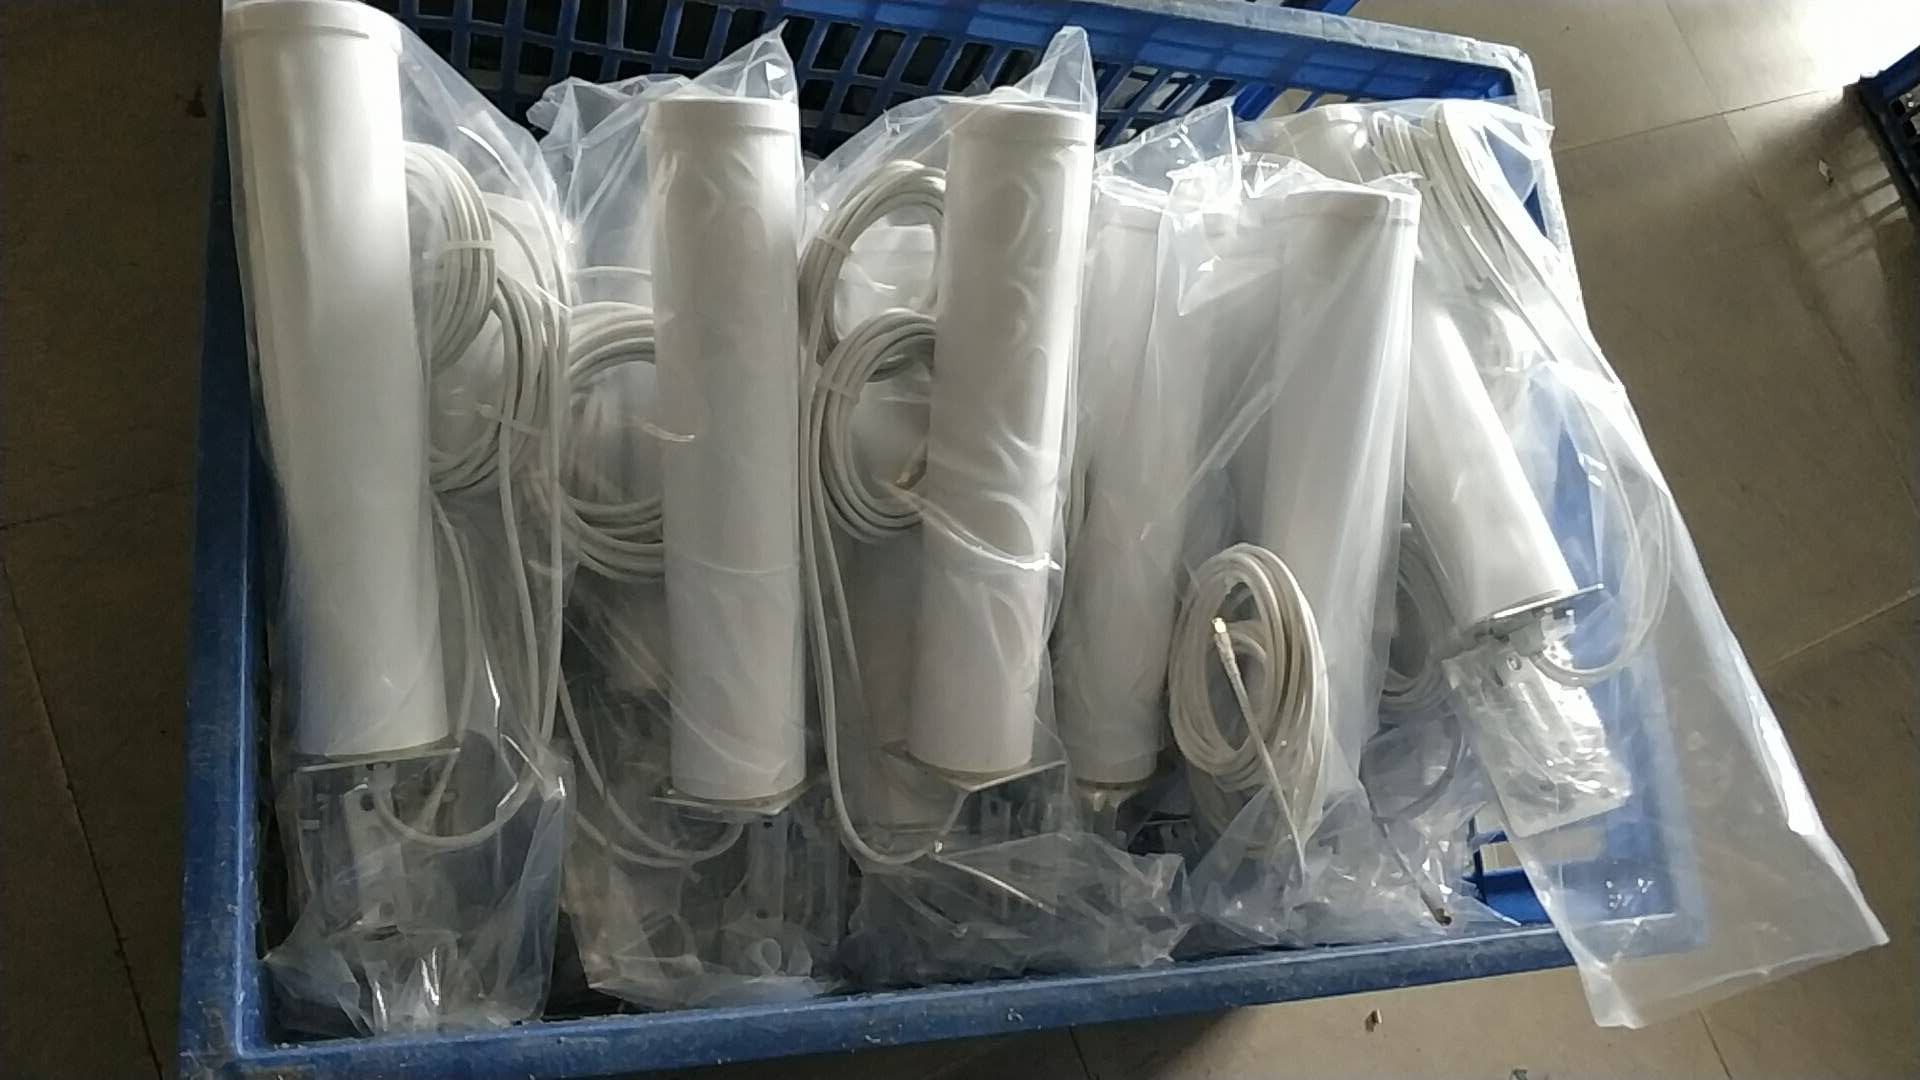 2018/2/5 500pcs 4G omni mimo outdoor antenna on producing